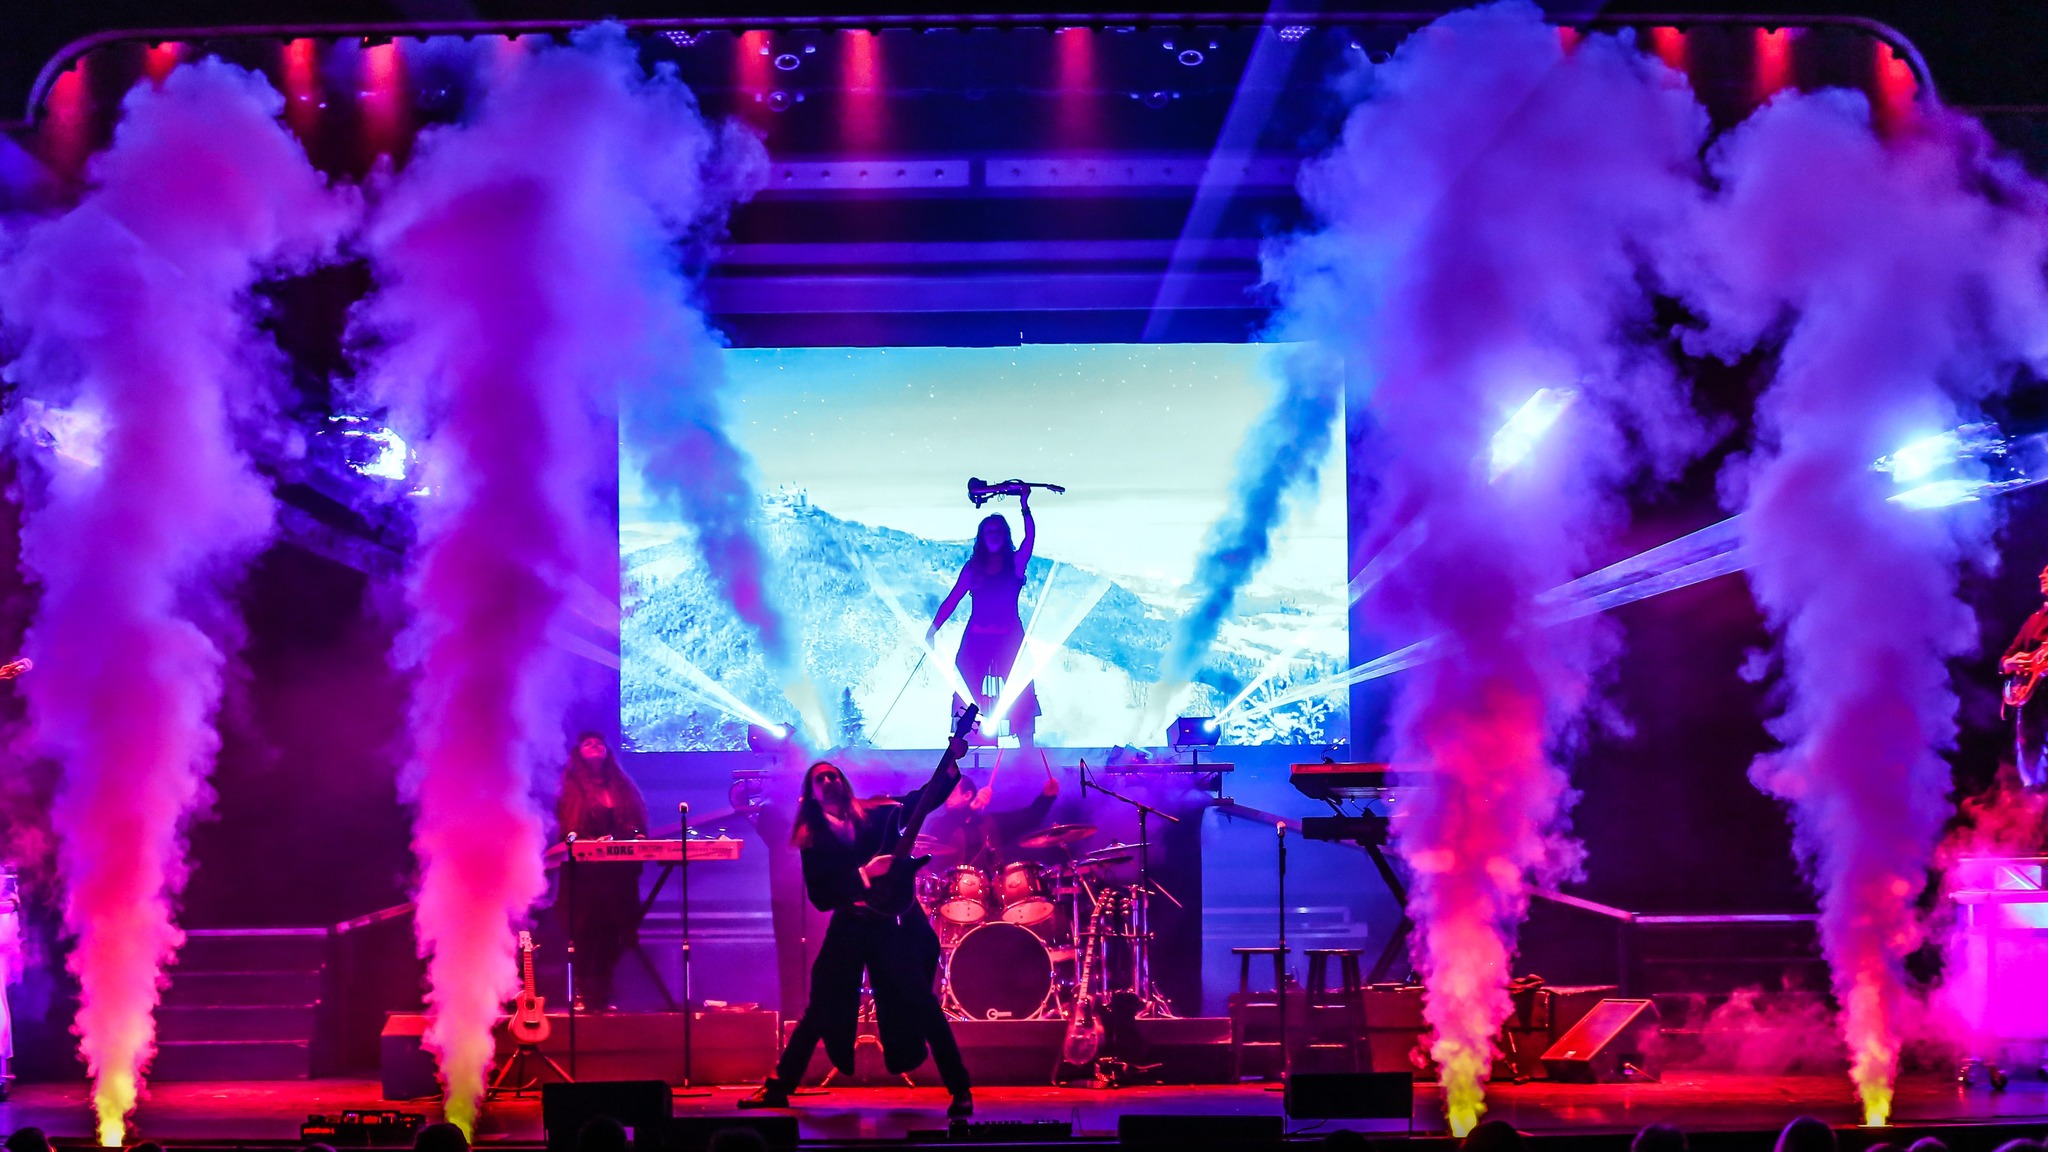 The Prophecy Show - A Tribute to Trans-Siberian Orchestra